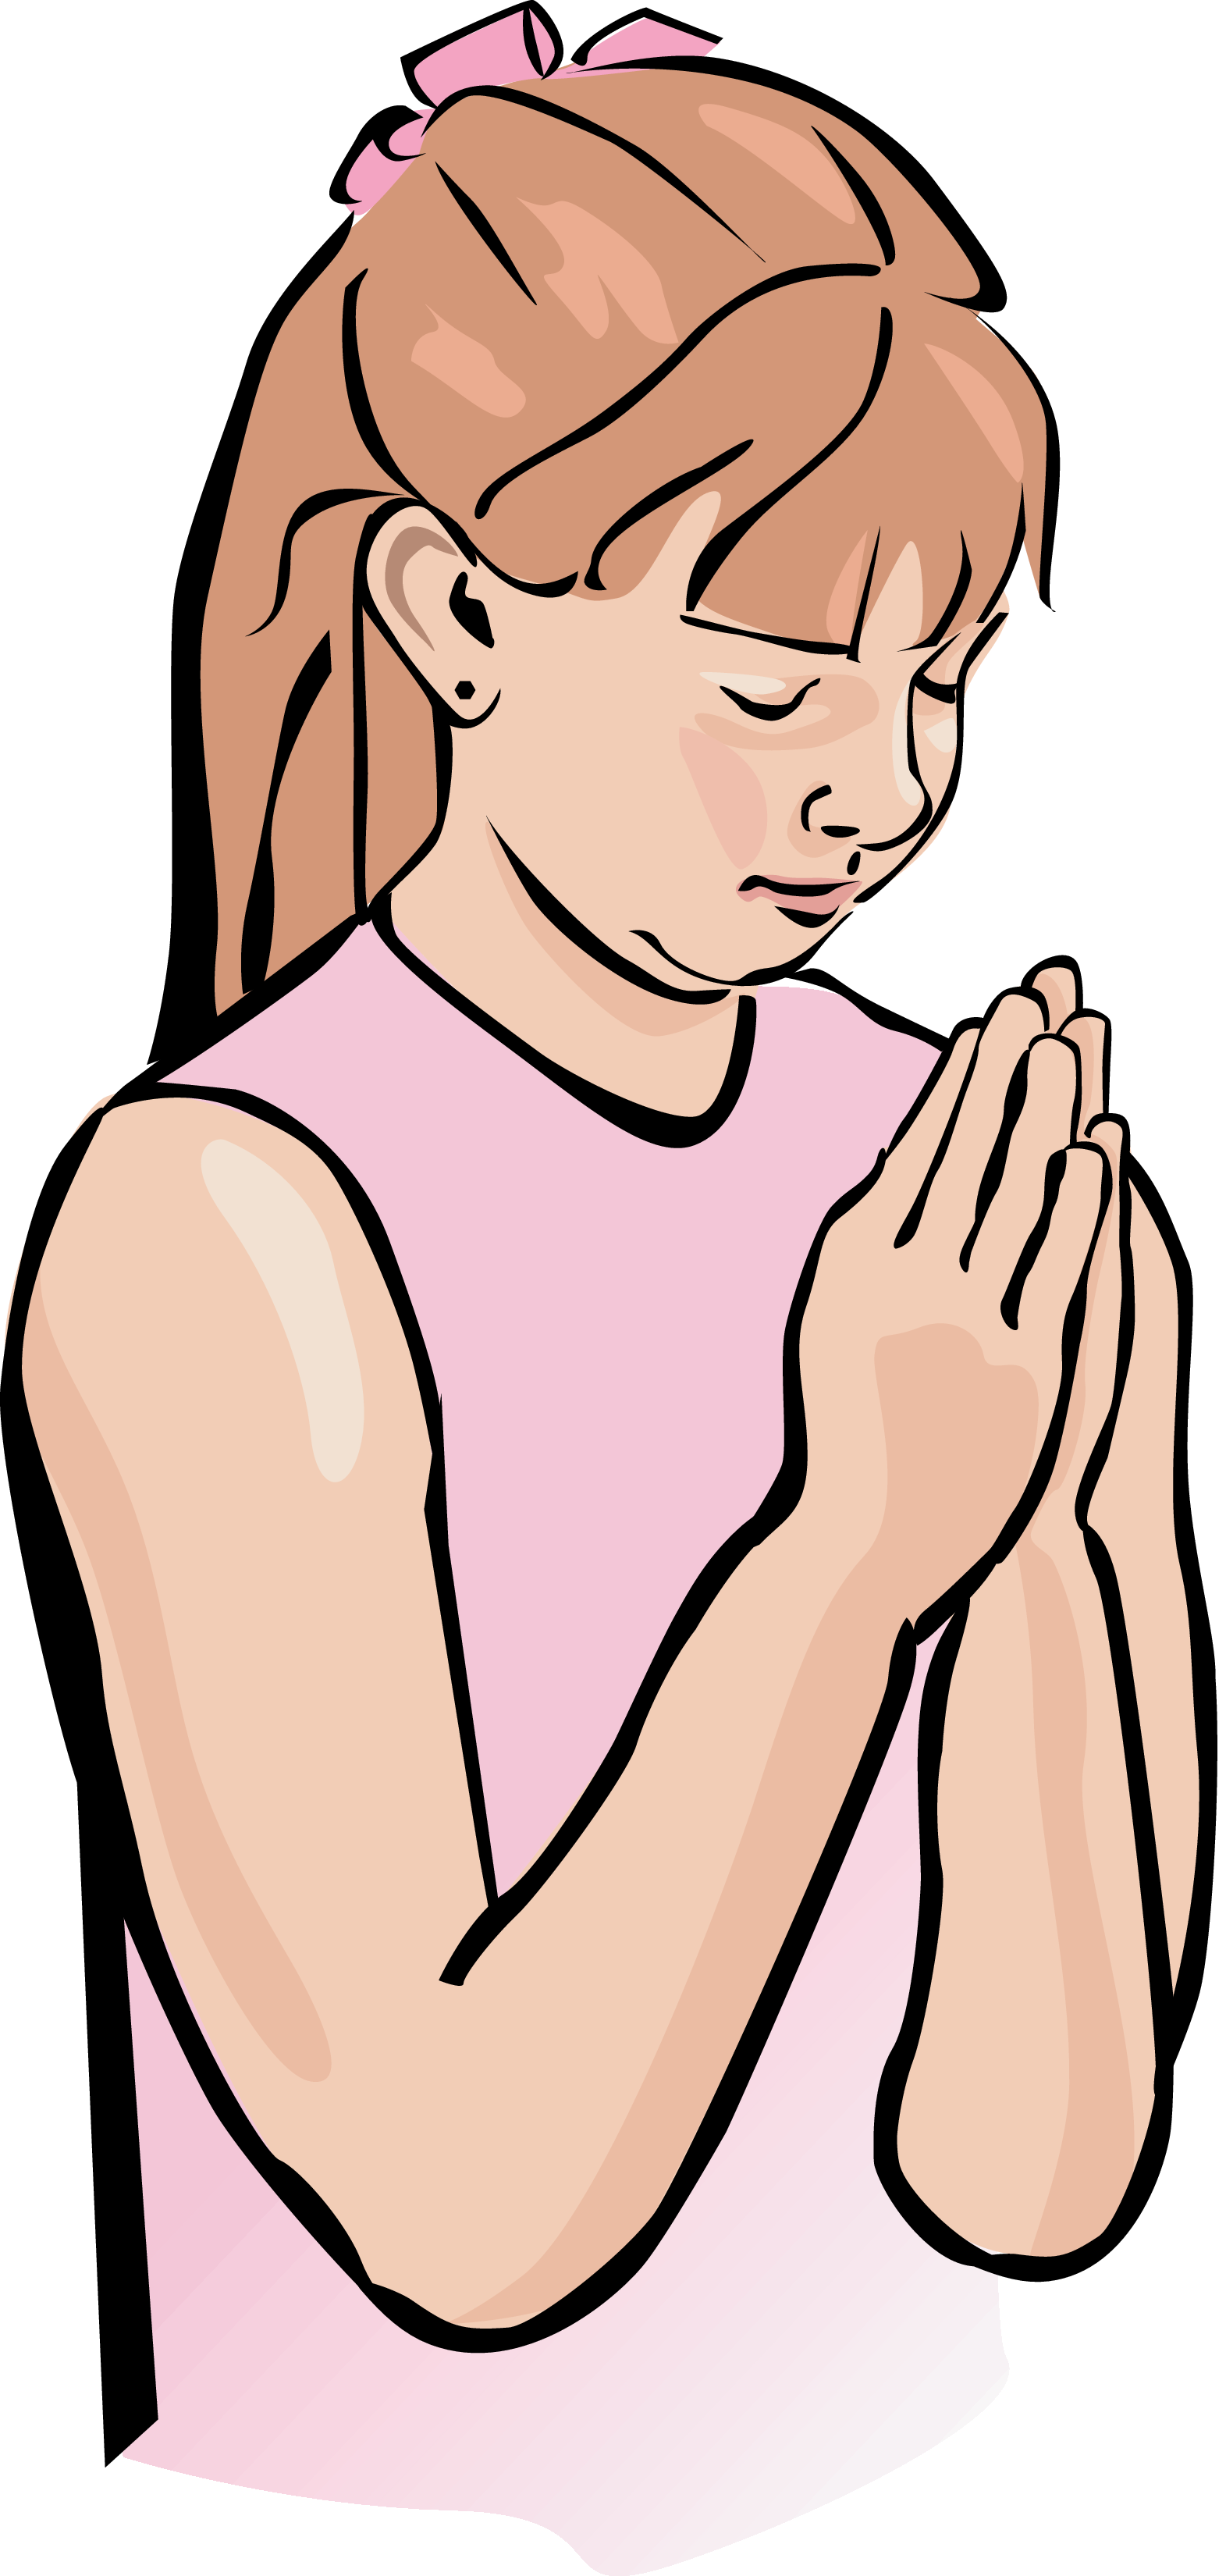 child-praying-clipart-cliparts-co